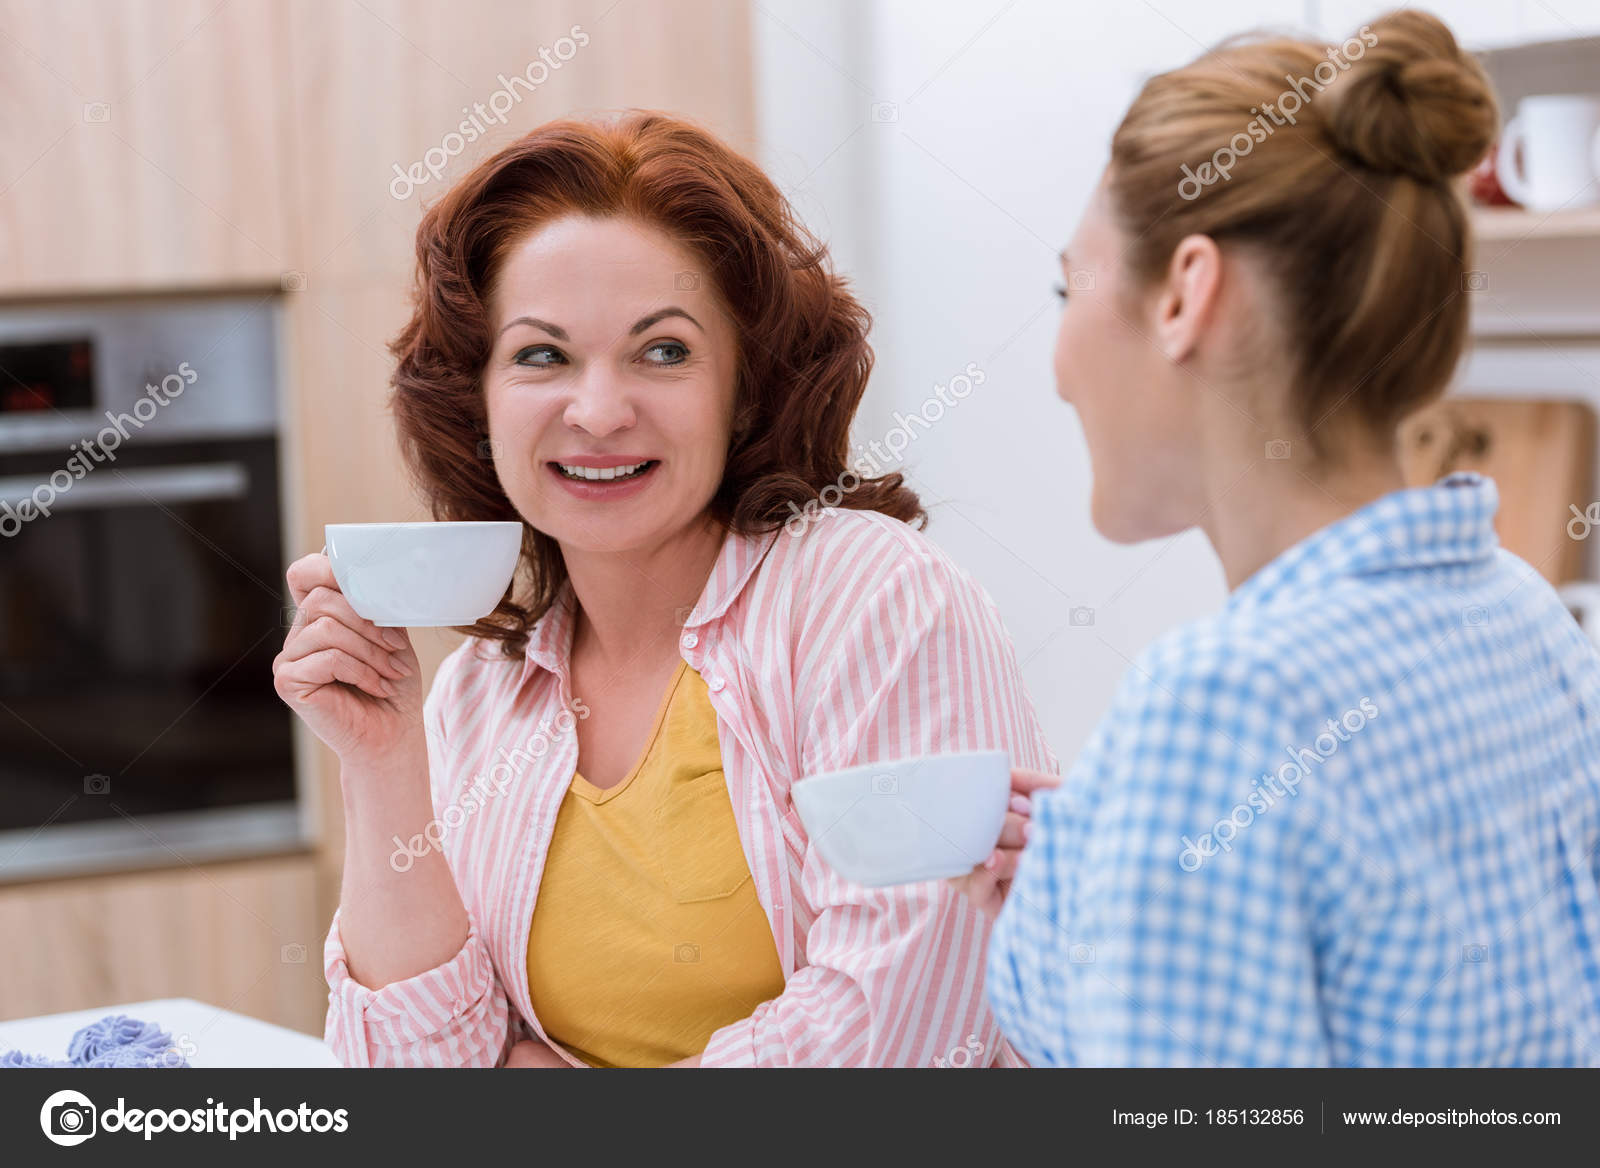 depositphotos_185132856-stock-photo-young-woman-her-mother-drinking